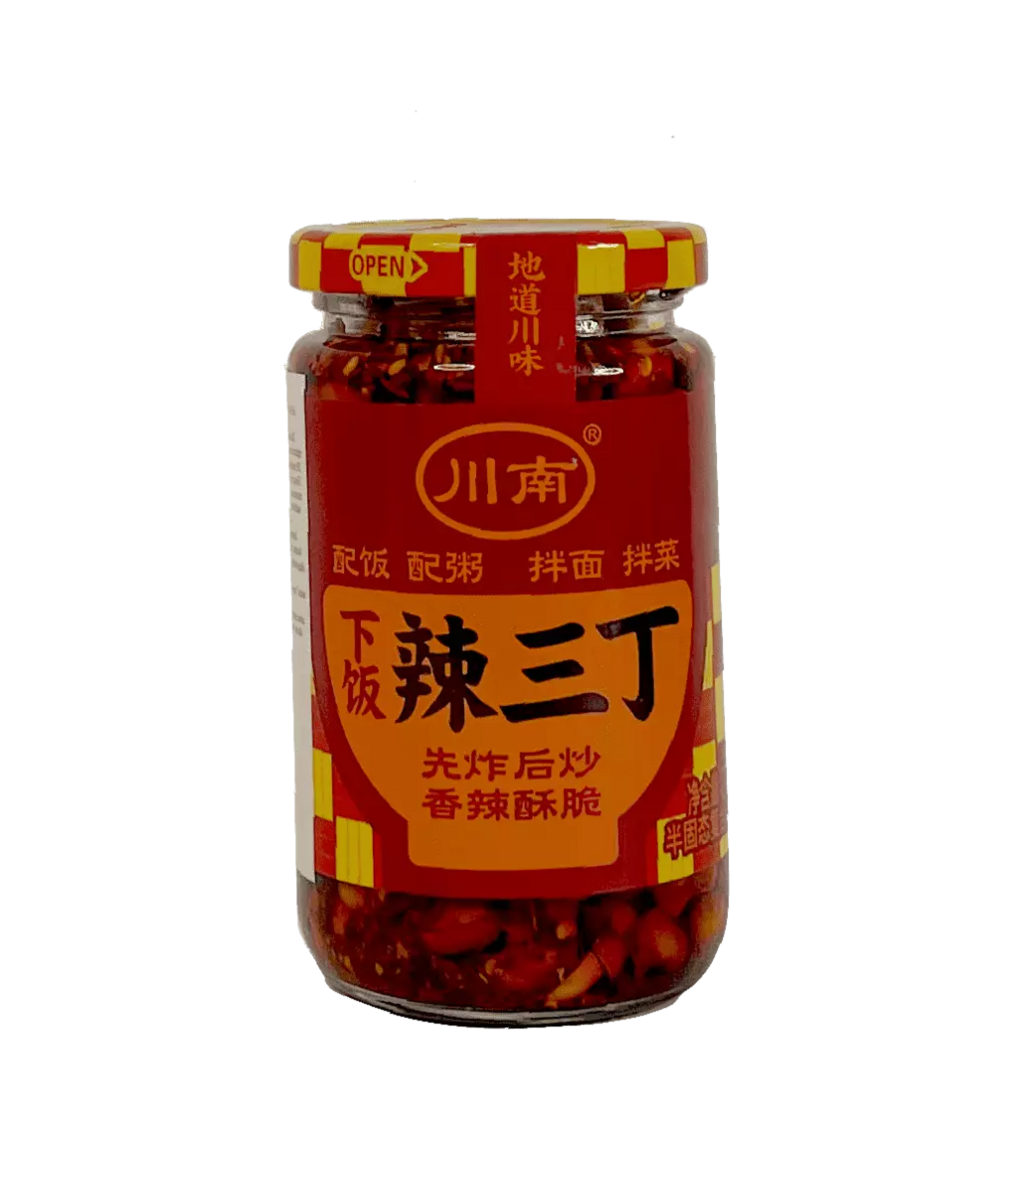 Chili in Oil With Bean Curd and Peanuts La San Ding 270g Chuannan China